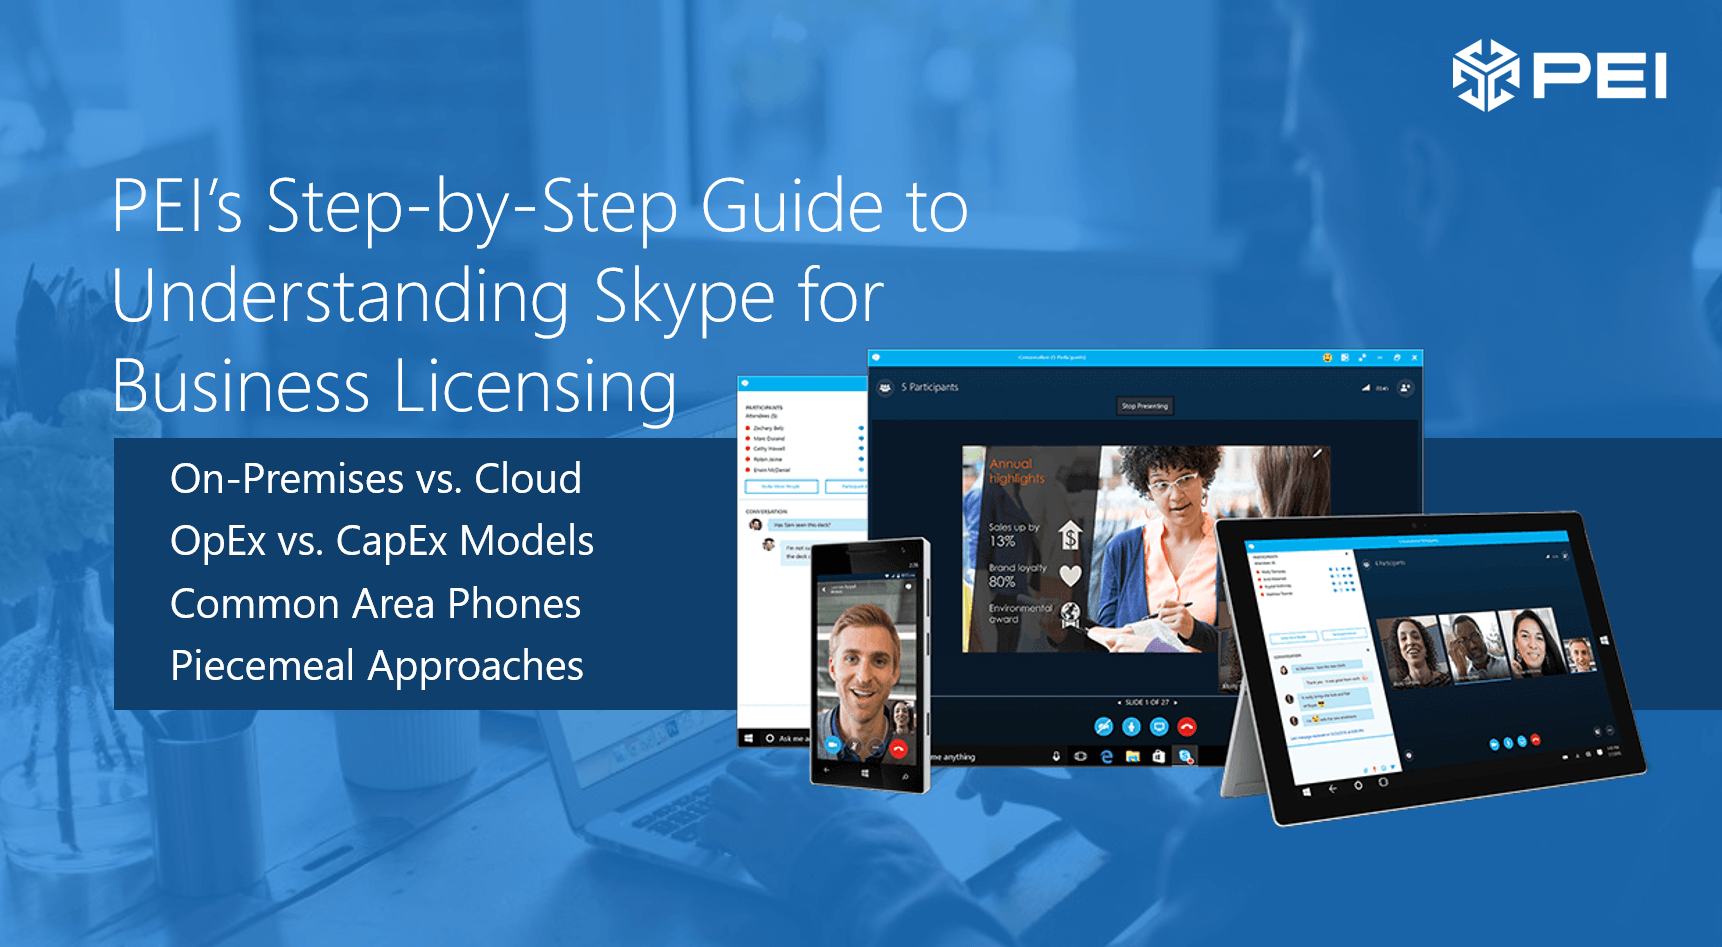 Step-by-step guide to understand Skype for Business Licensing header